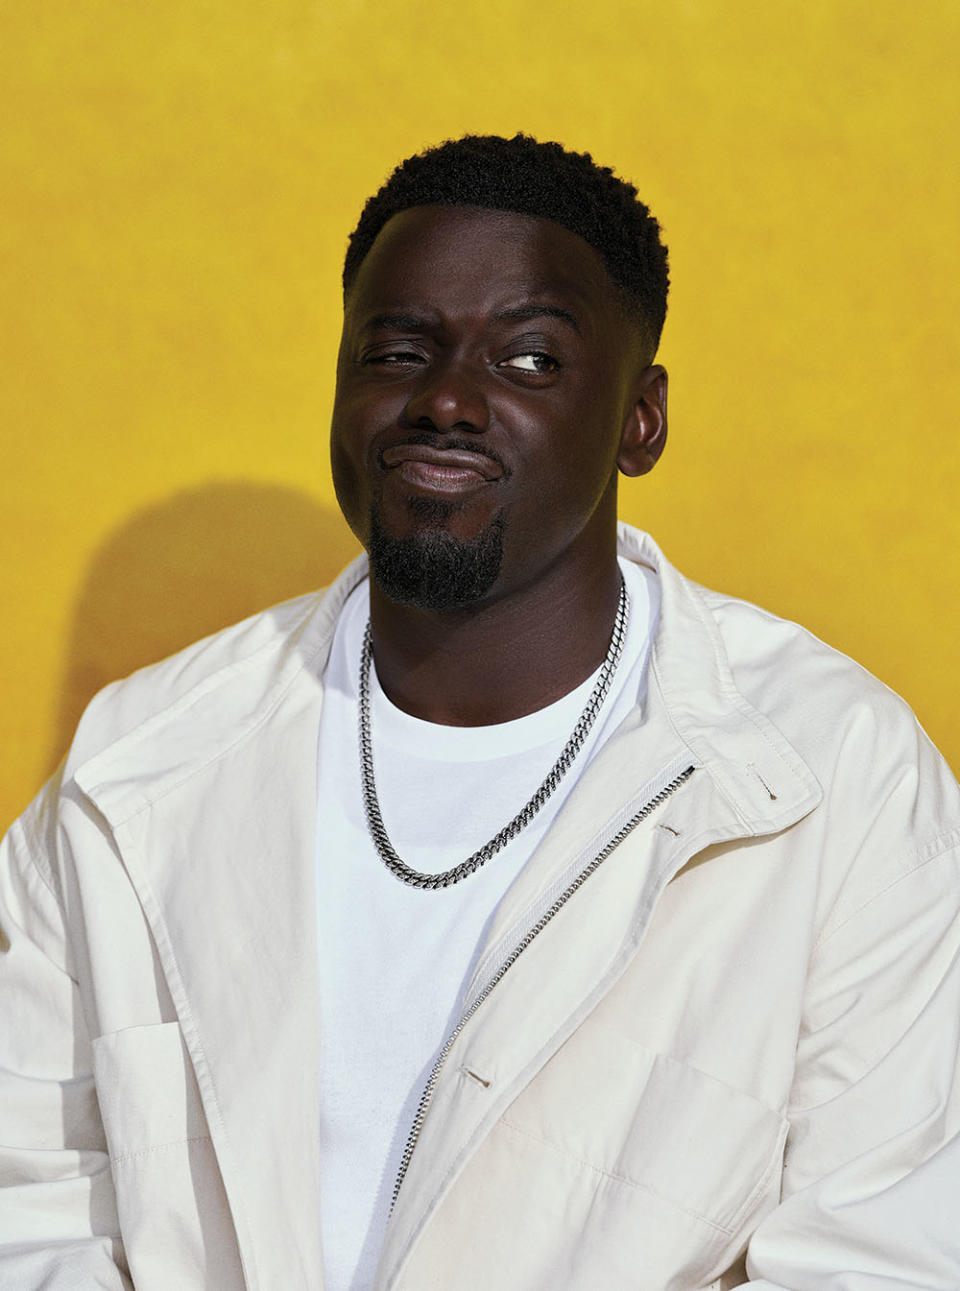 “I don’t like to give too much away,” Kaluuya says on how he feels he’s perceived. - Credit: Photographed by Obidi Nzeribe